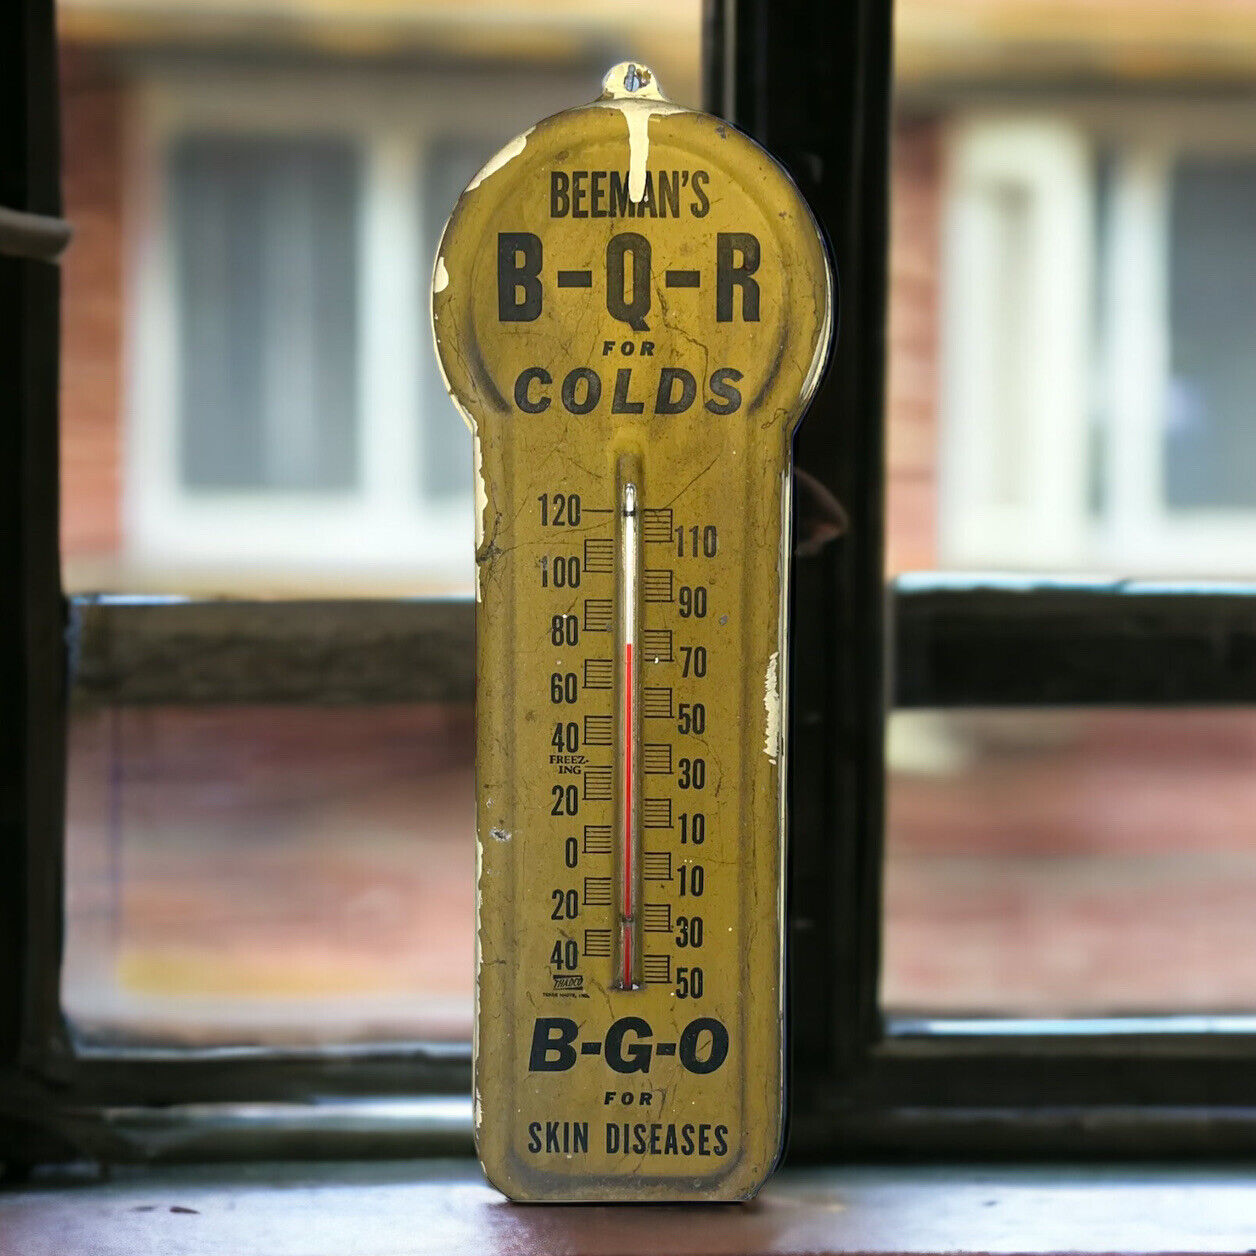 Vtg BEEMAN’S B-Q-R For COLDS Skin Disease Thadco wall thermometer advertising